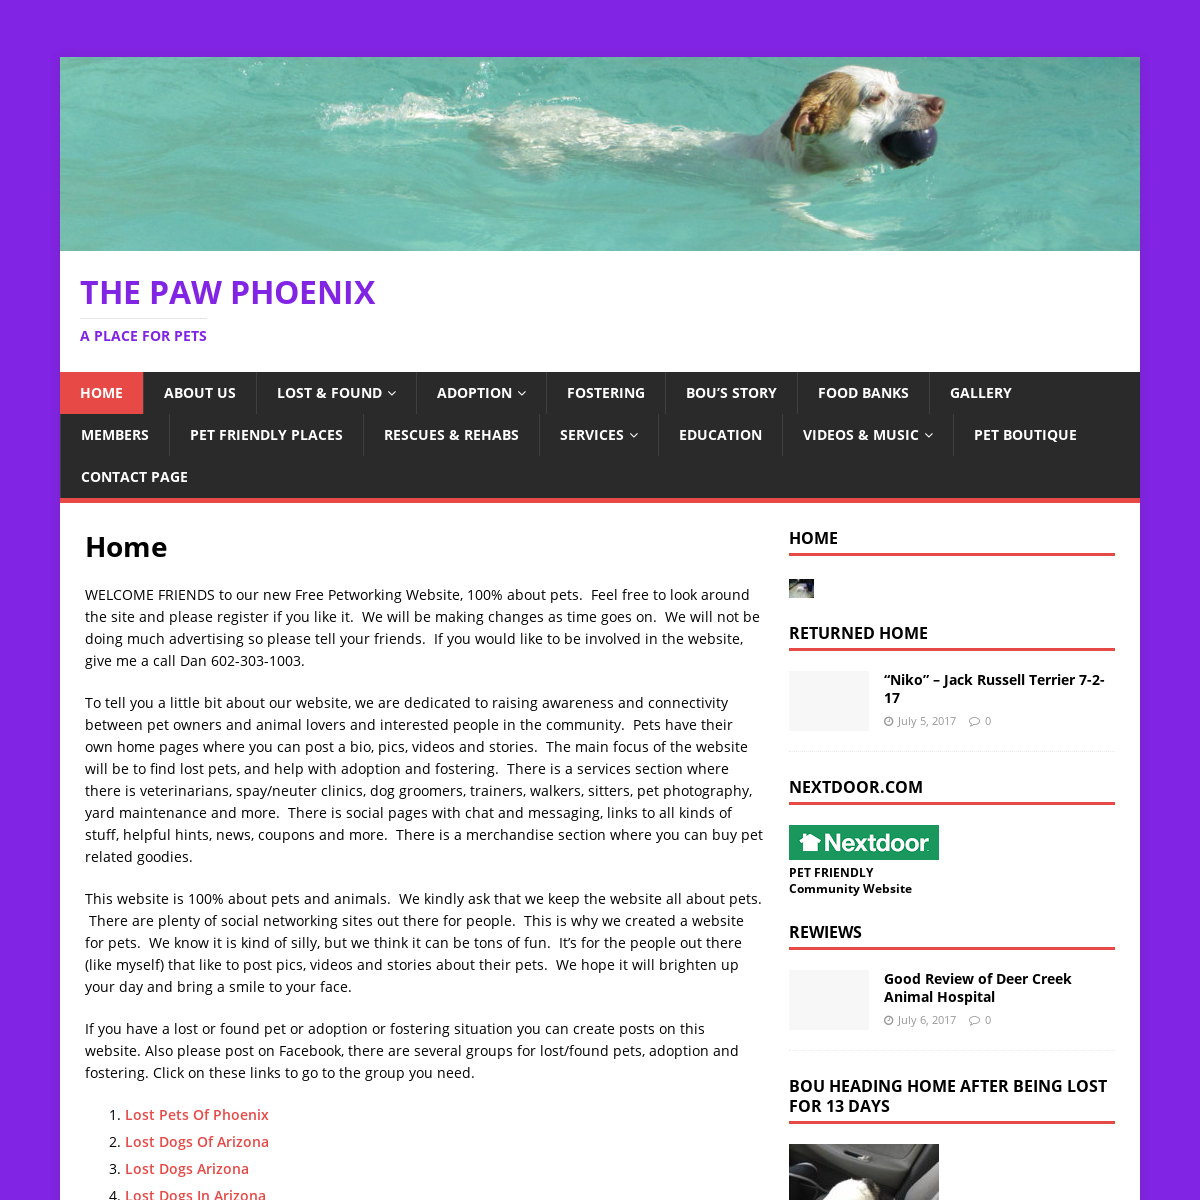 A complete backup of thepawphoenix.com